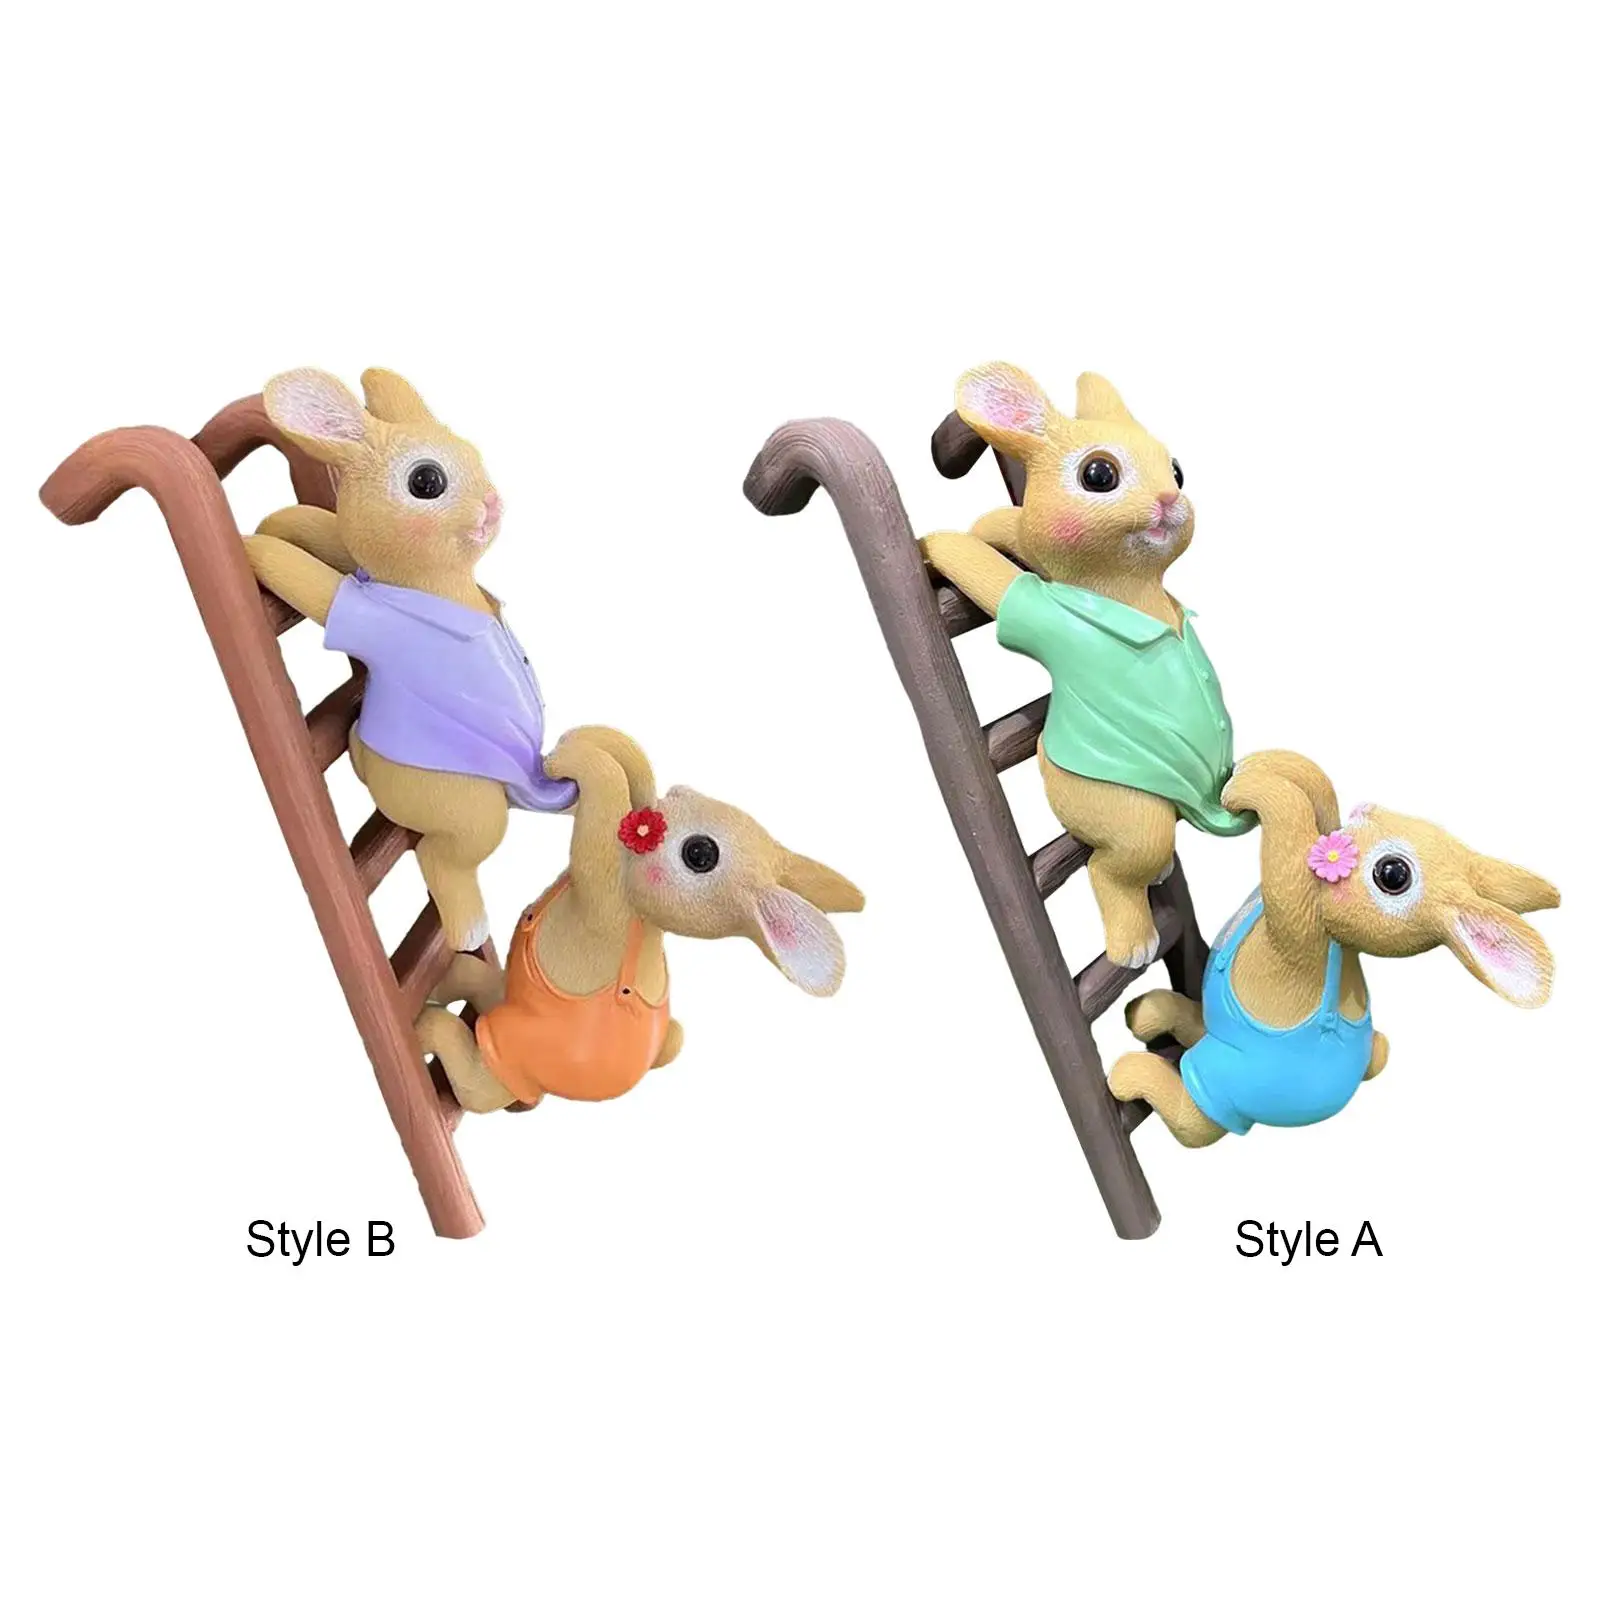 Cute Climbing Ladder Rabbits 3 in 1 Planter Pot Hanger Micro Landscape Photo Props Crafts Garden Decoration for Patio Lawn Yard